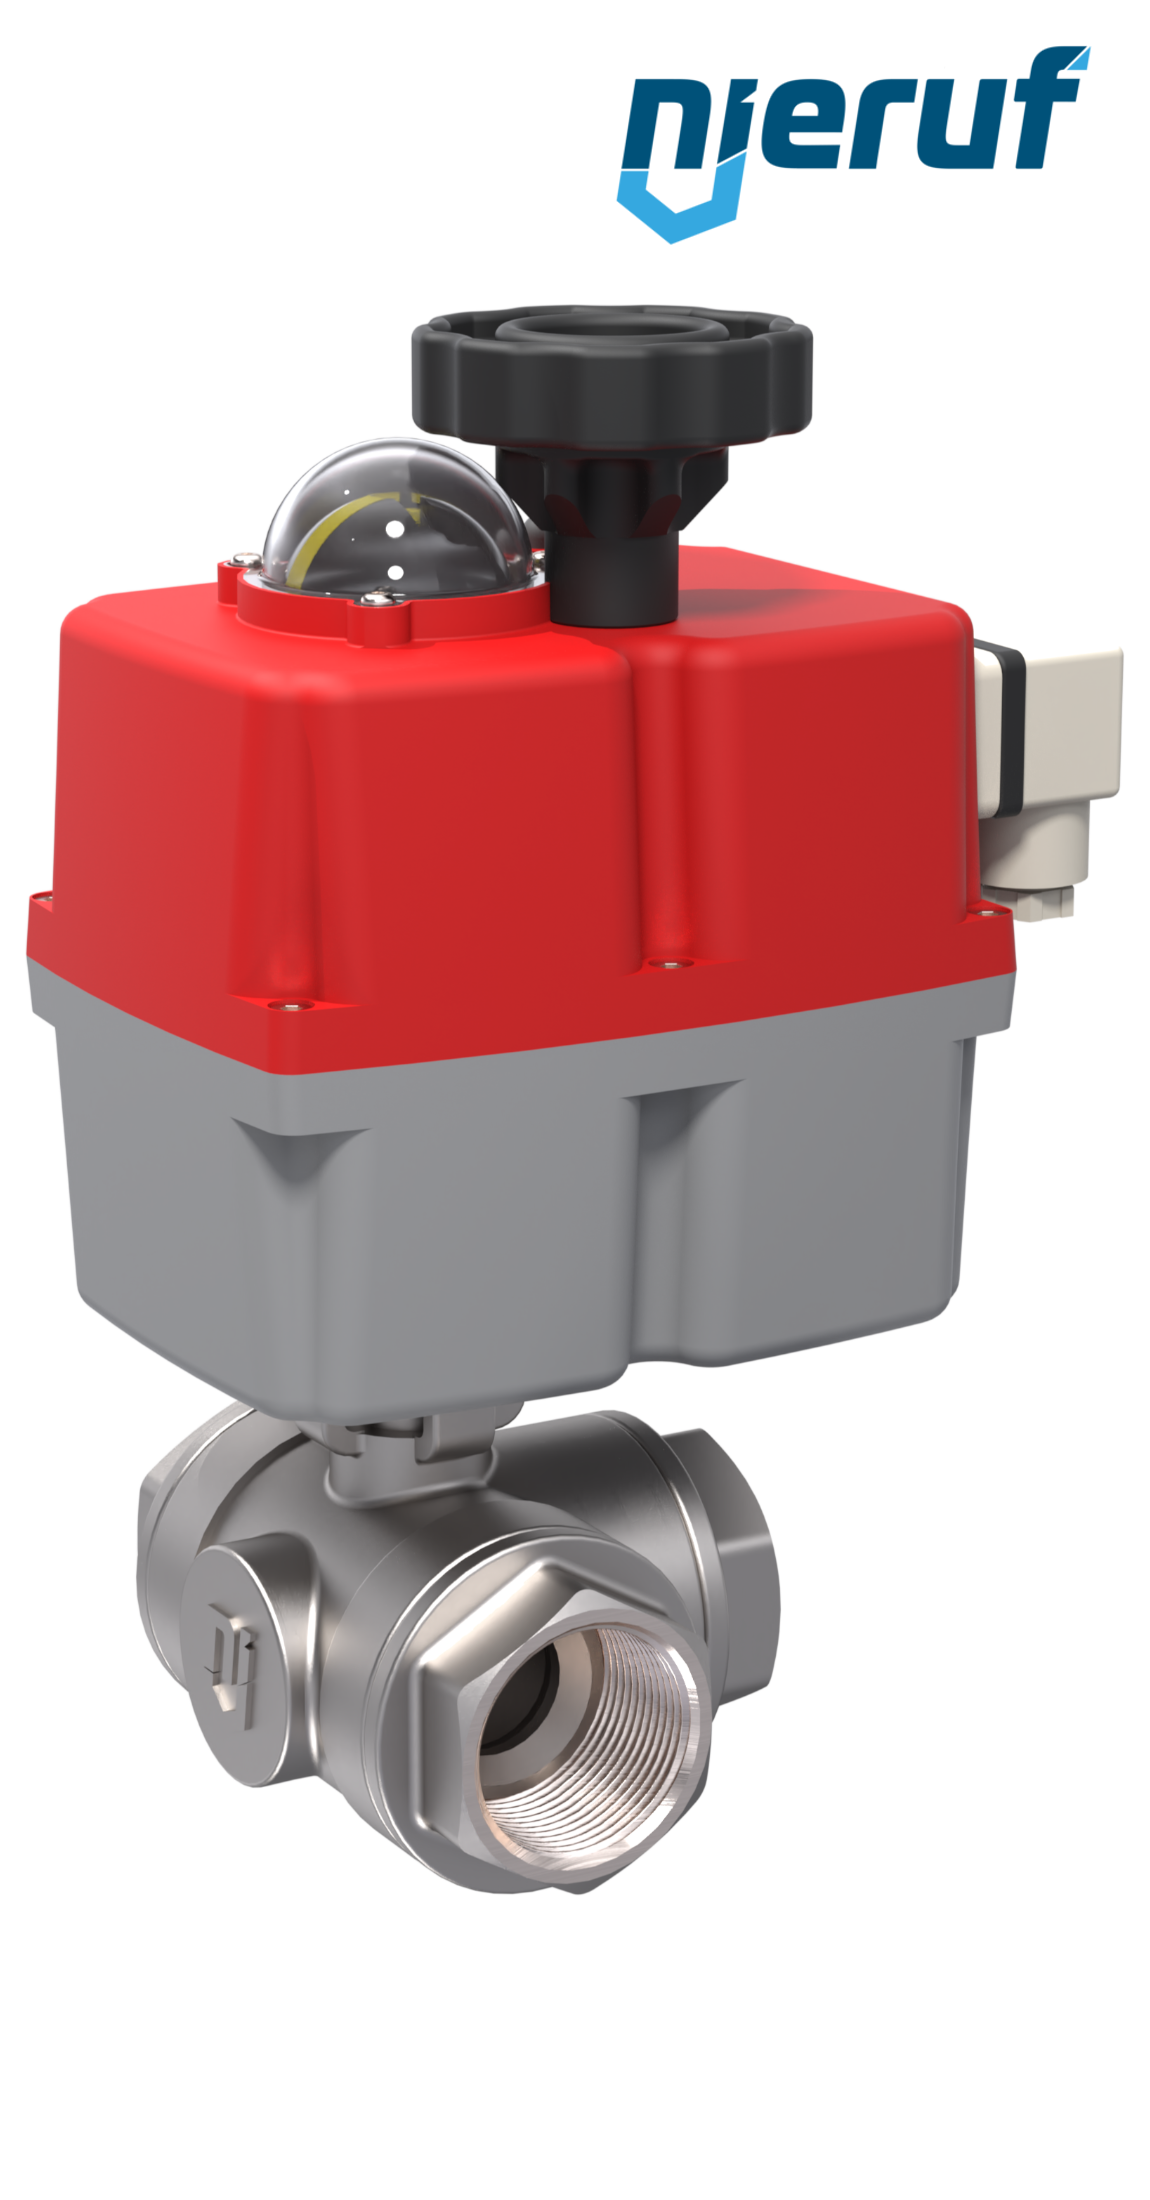 3 way automatic-ball valve 24-240V DN10 - 3/8" inch stainless steel reduced port design with T drilling